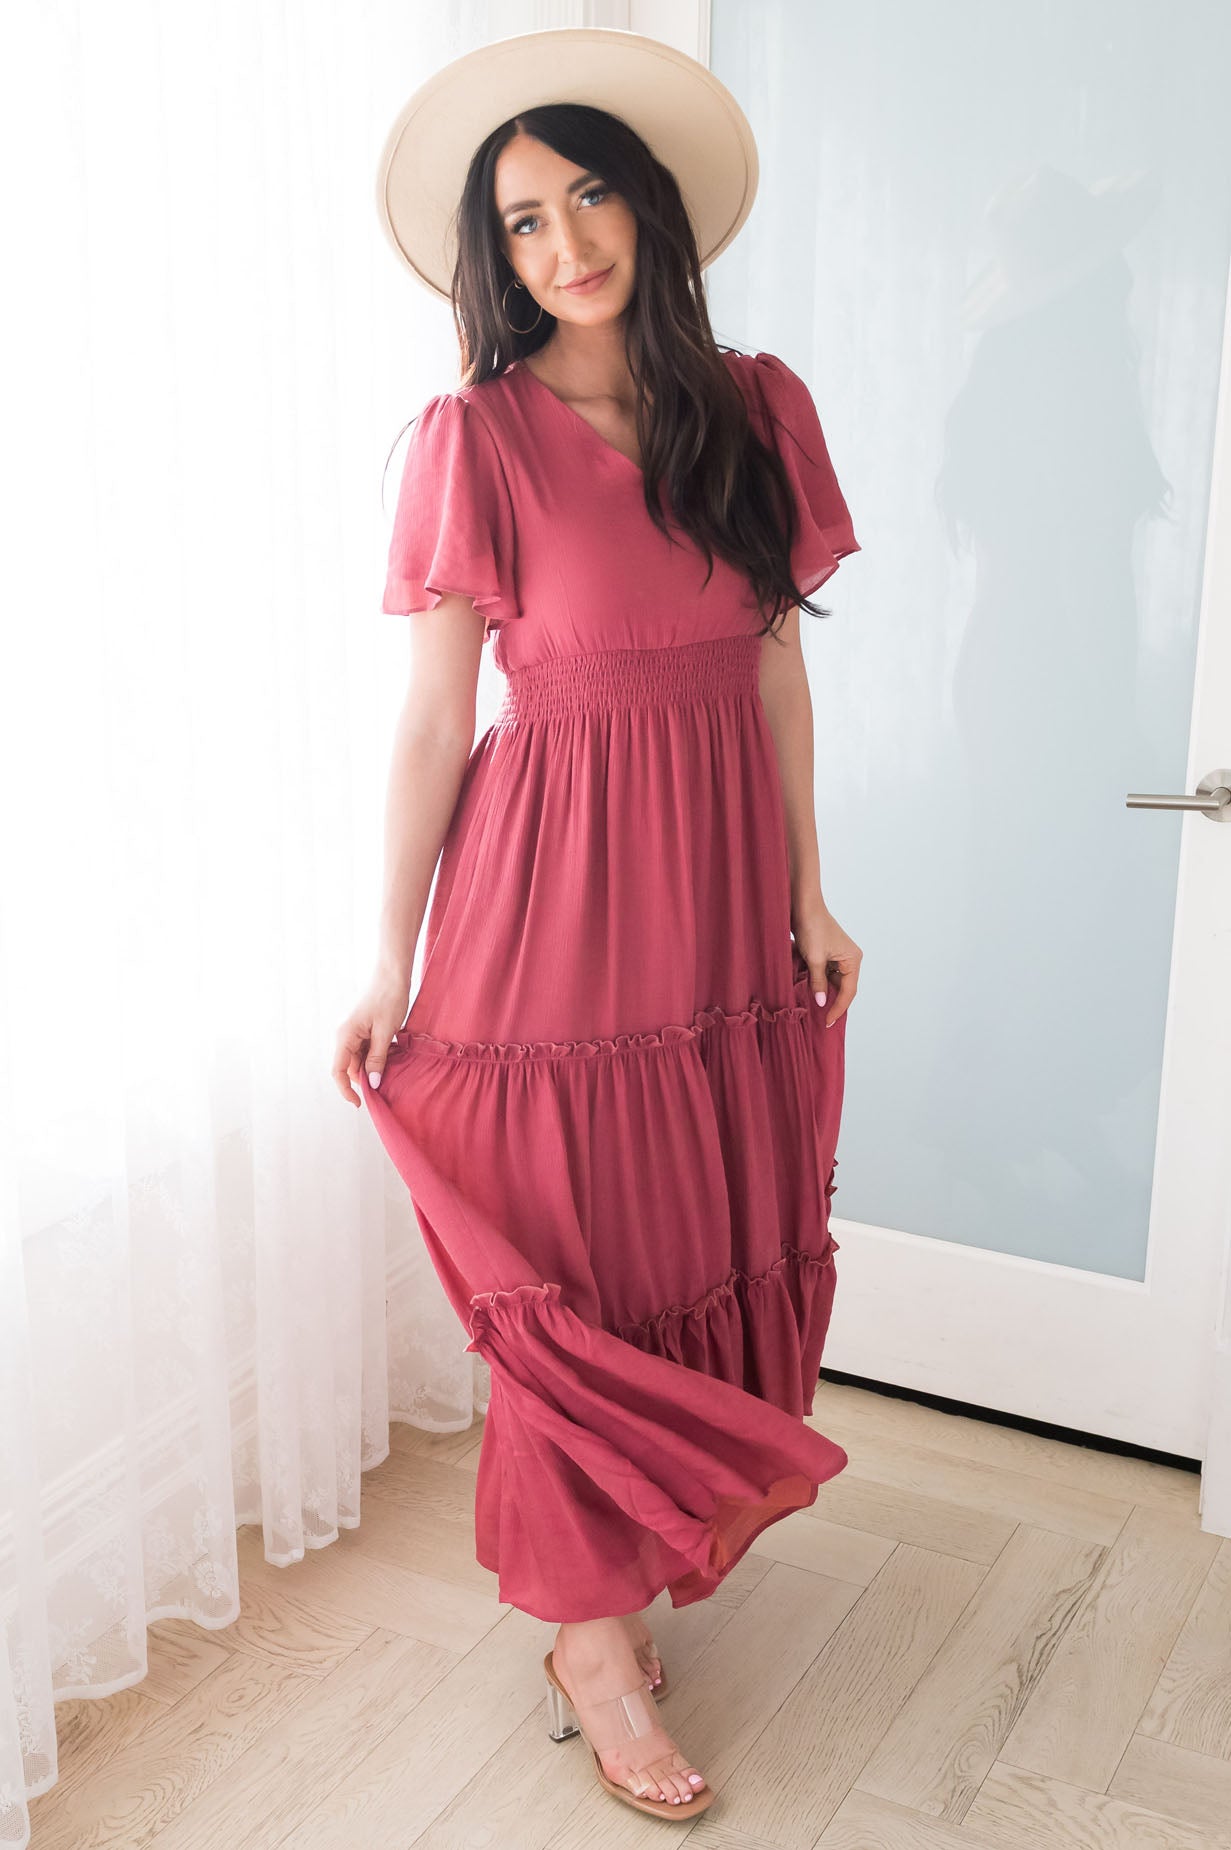 The Taylor Modest Maxi Dress - NeeSee's Dresses